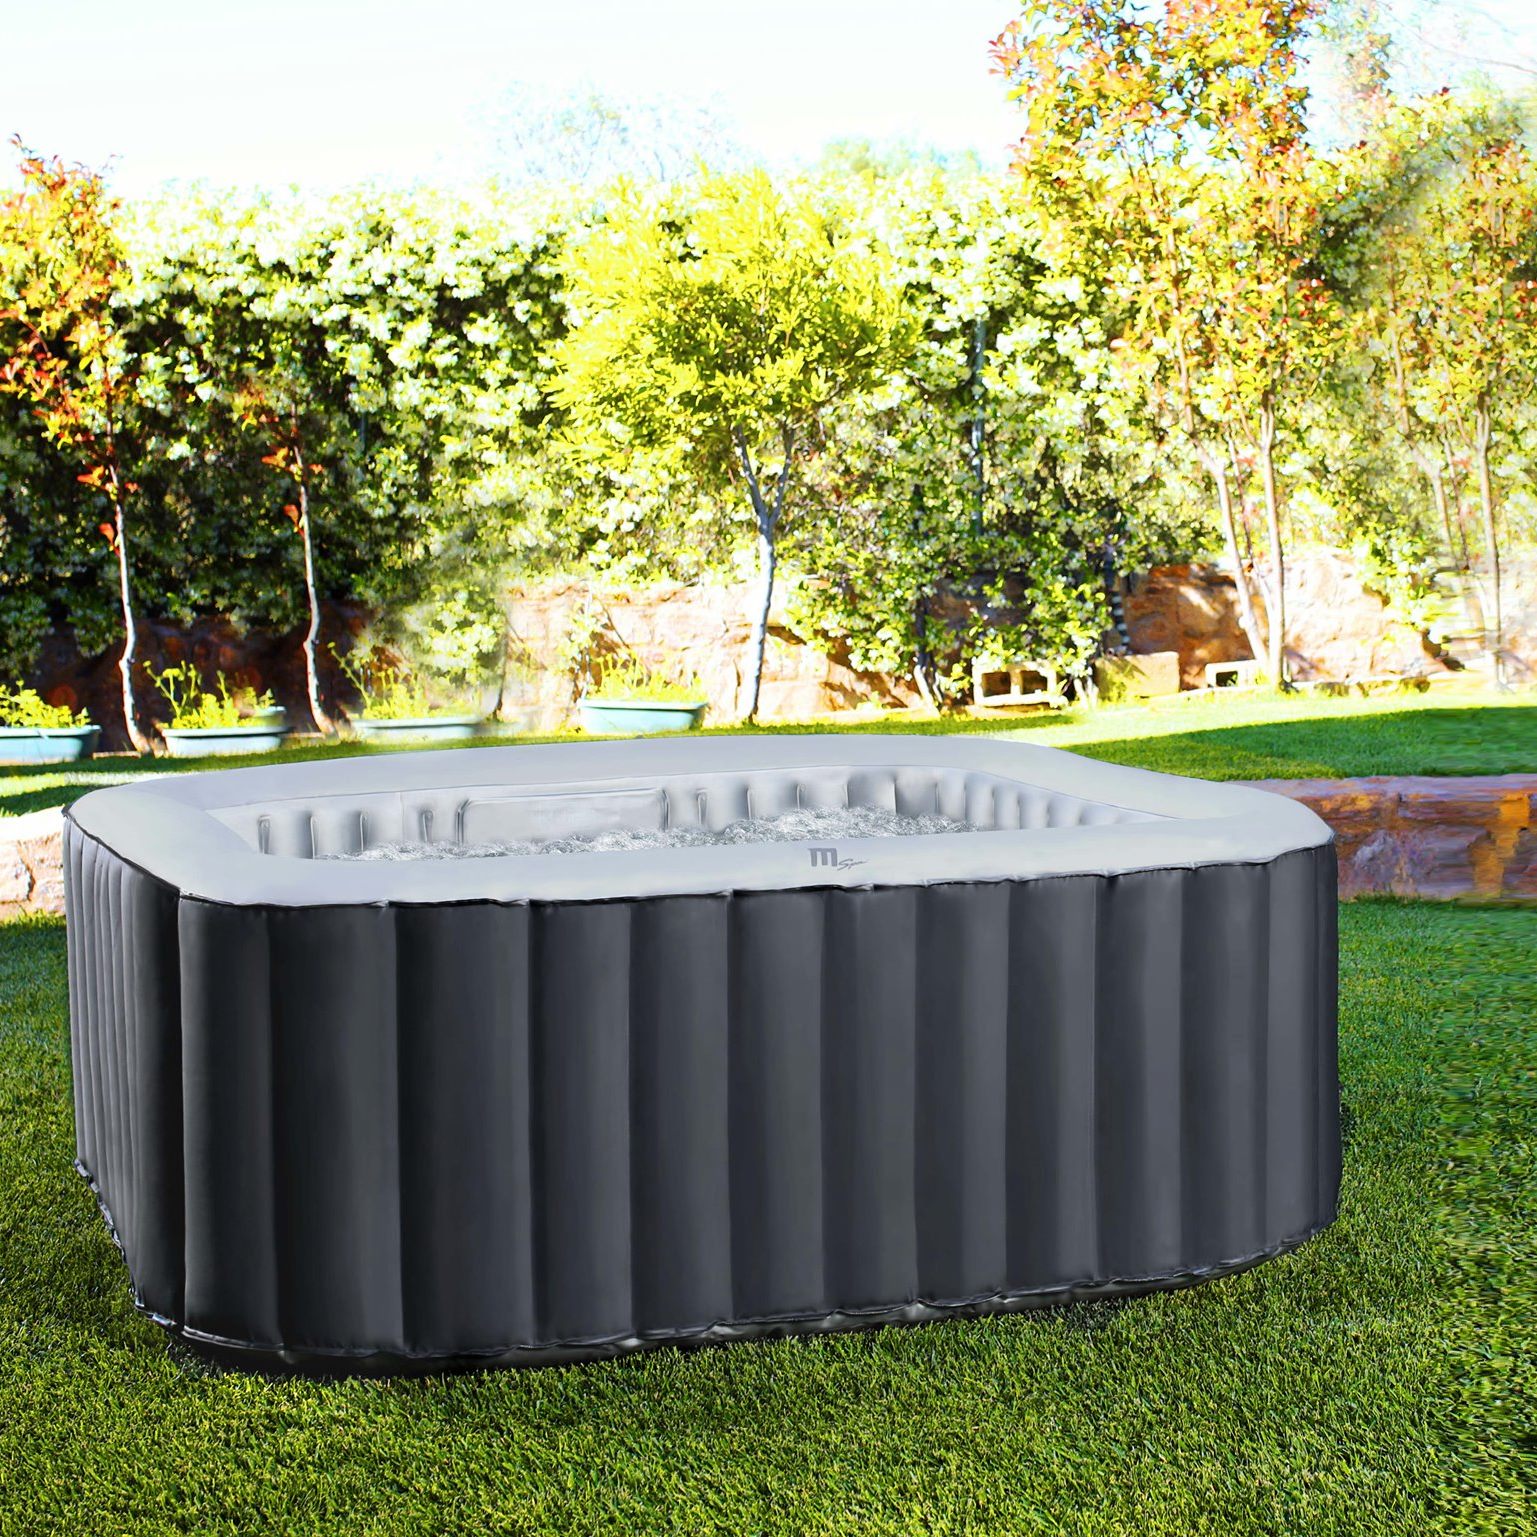 MSpa inflatable hot tubs in stock - Camaro, Soho and Alpine. 
 Choose your favourite :-)

 » Outdoor Furniture Fuengirola, Costa Del Sol, Spain